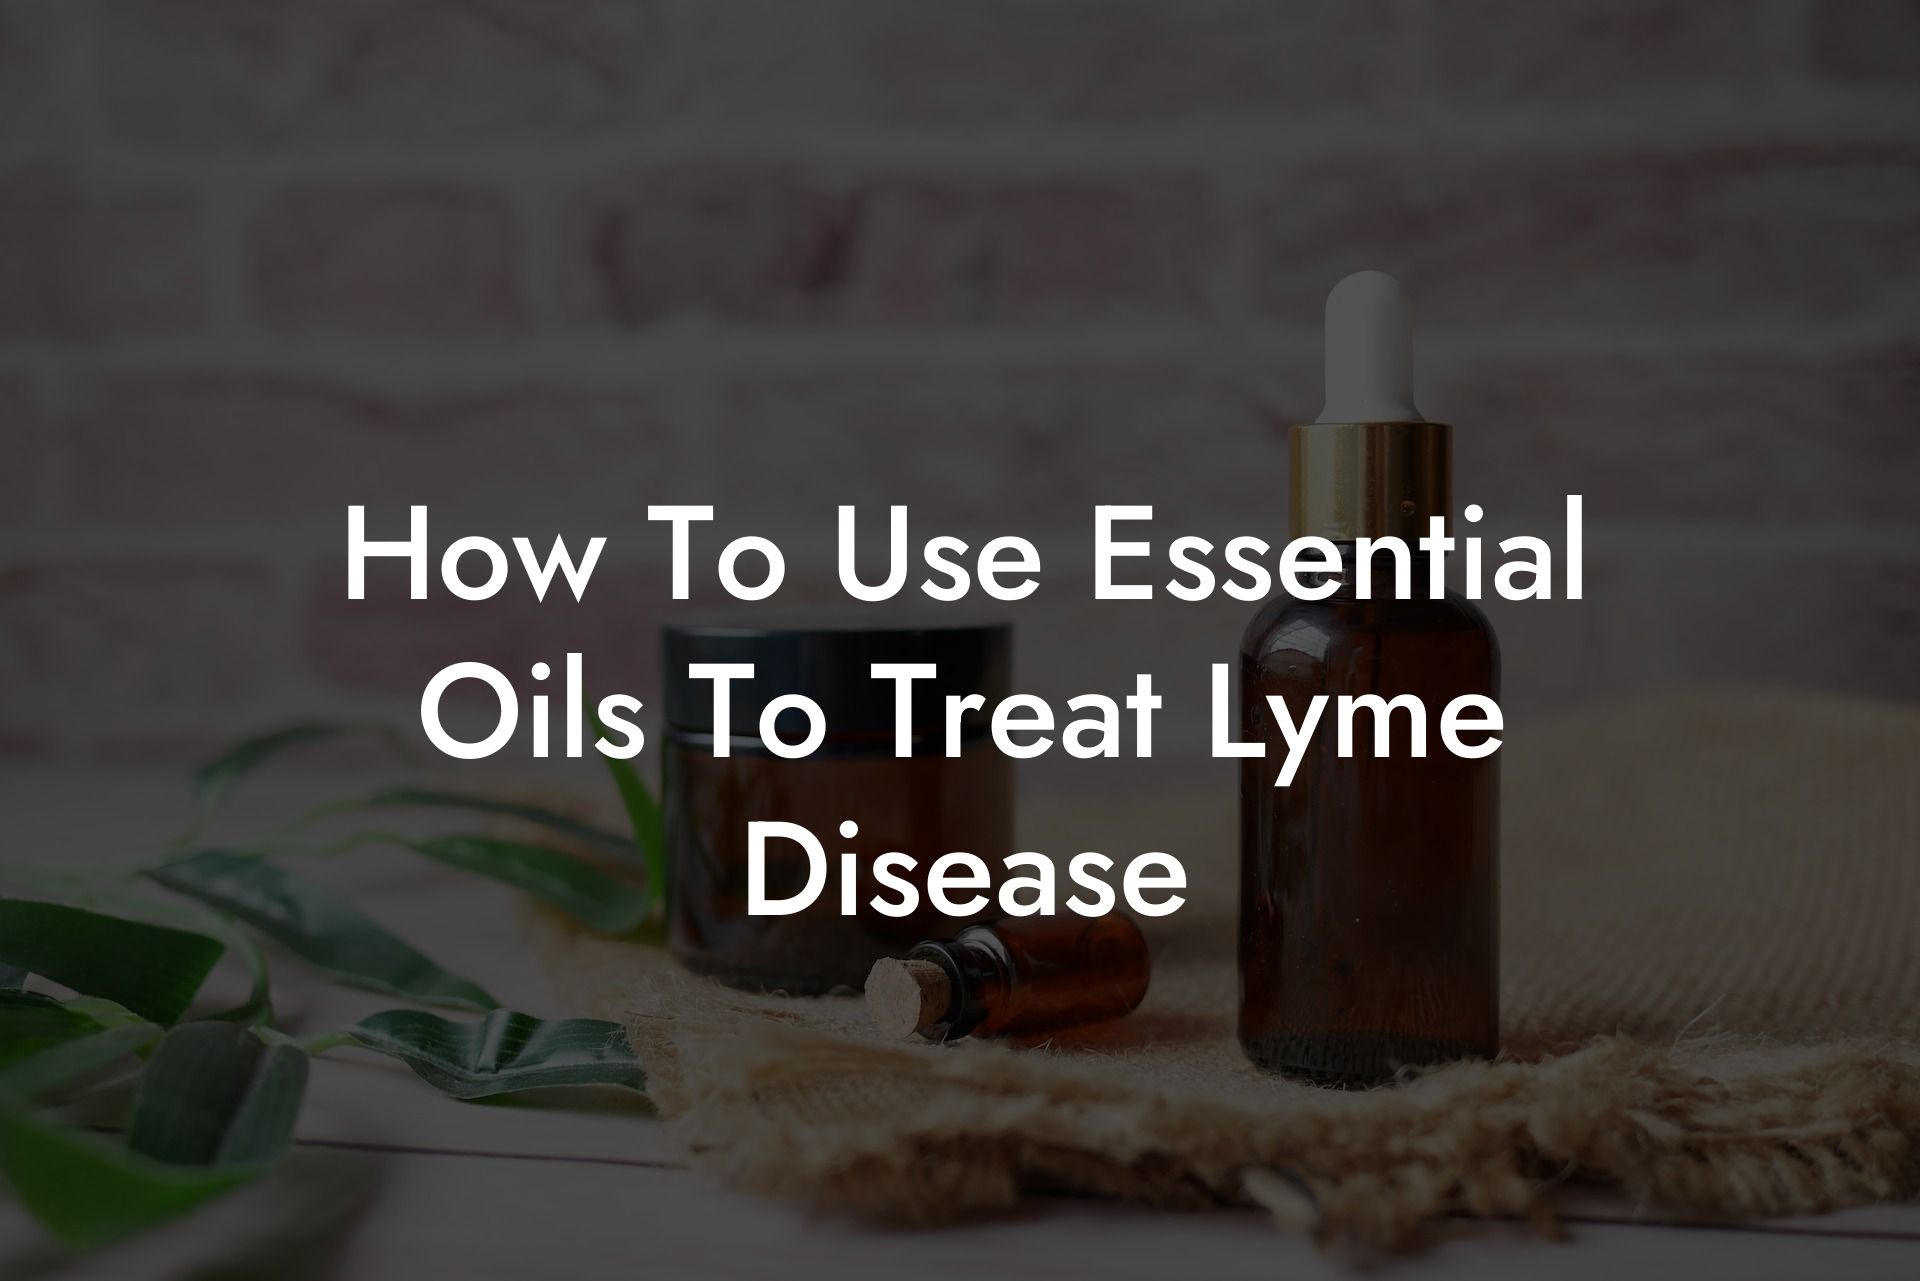 How To Use Essential Oils To Treat Lyme Disease